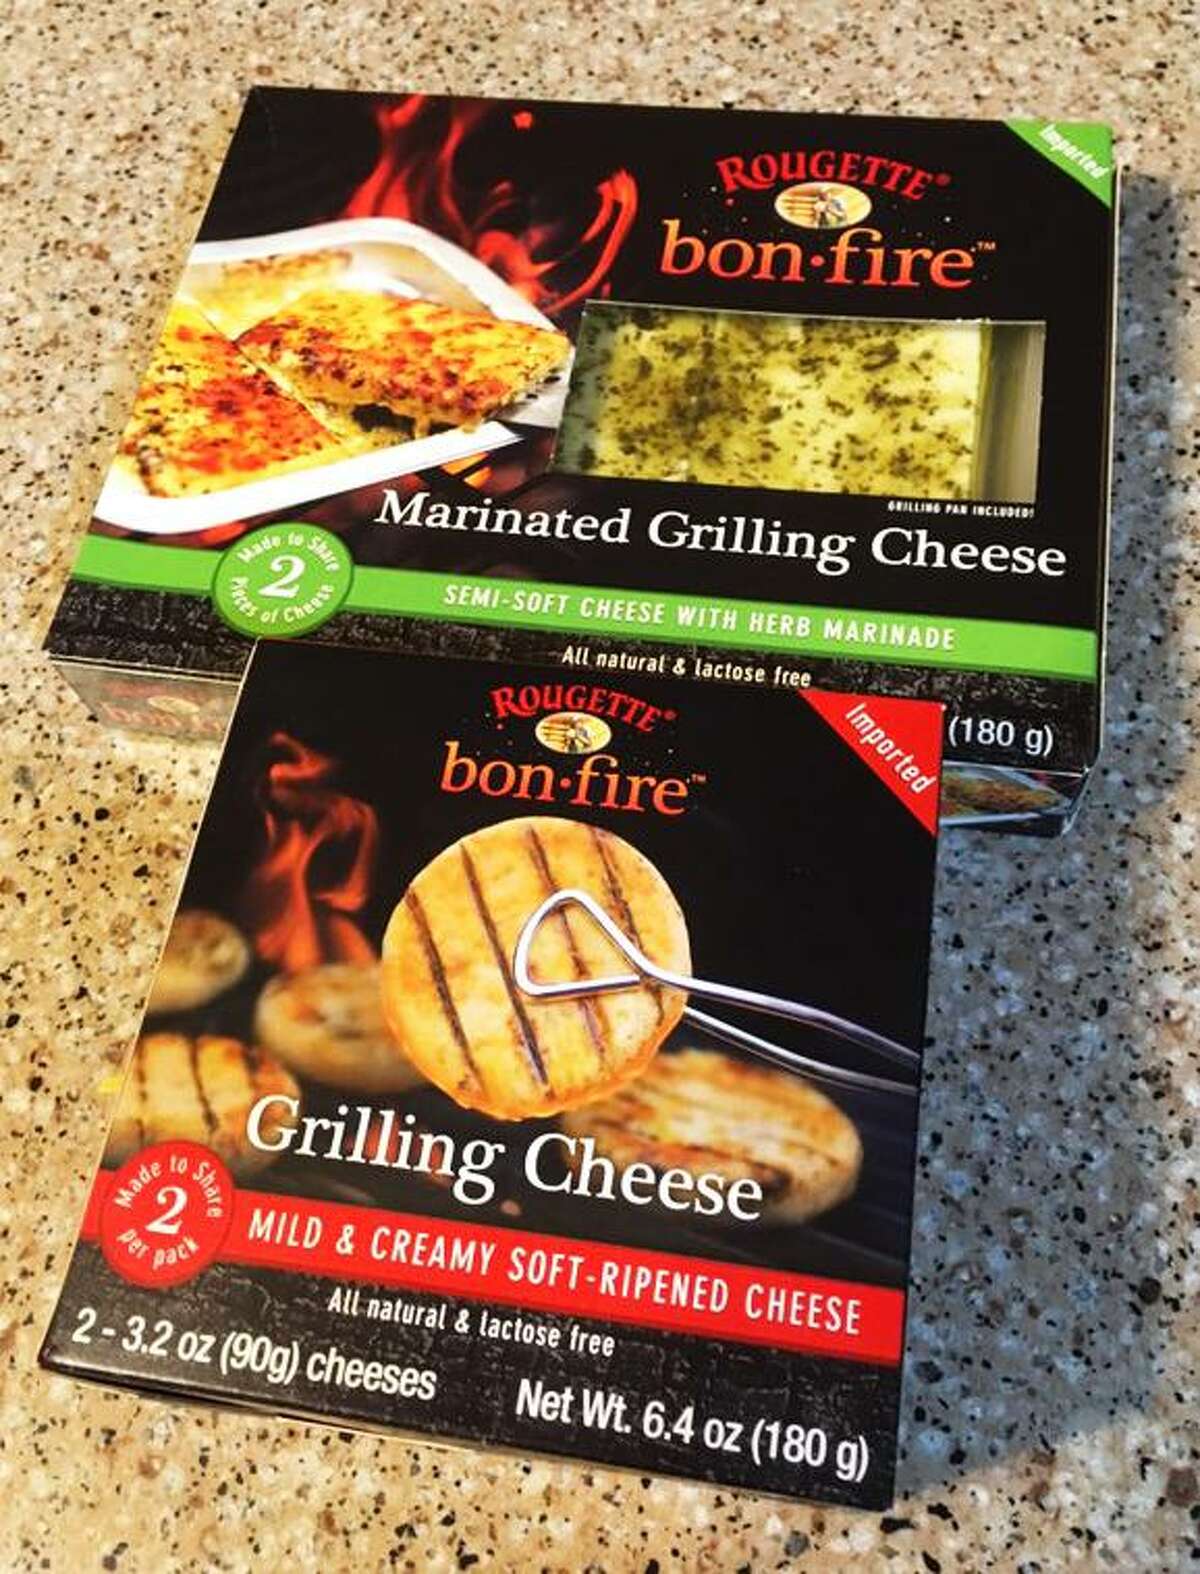 An assortment of Rougette Bonfire grilling cheeses, which are available at area H-E-B stores for $7.98 per package.